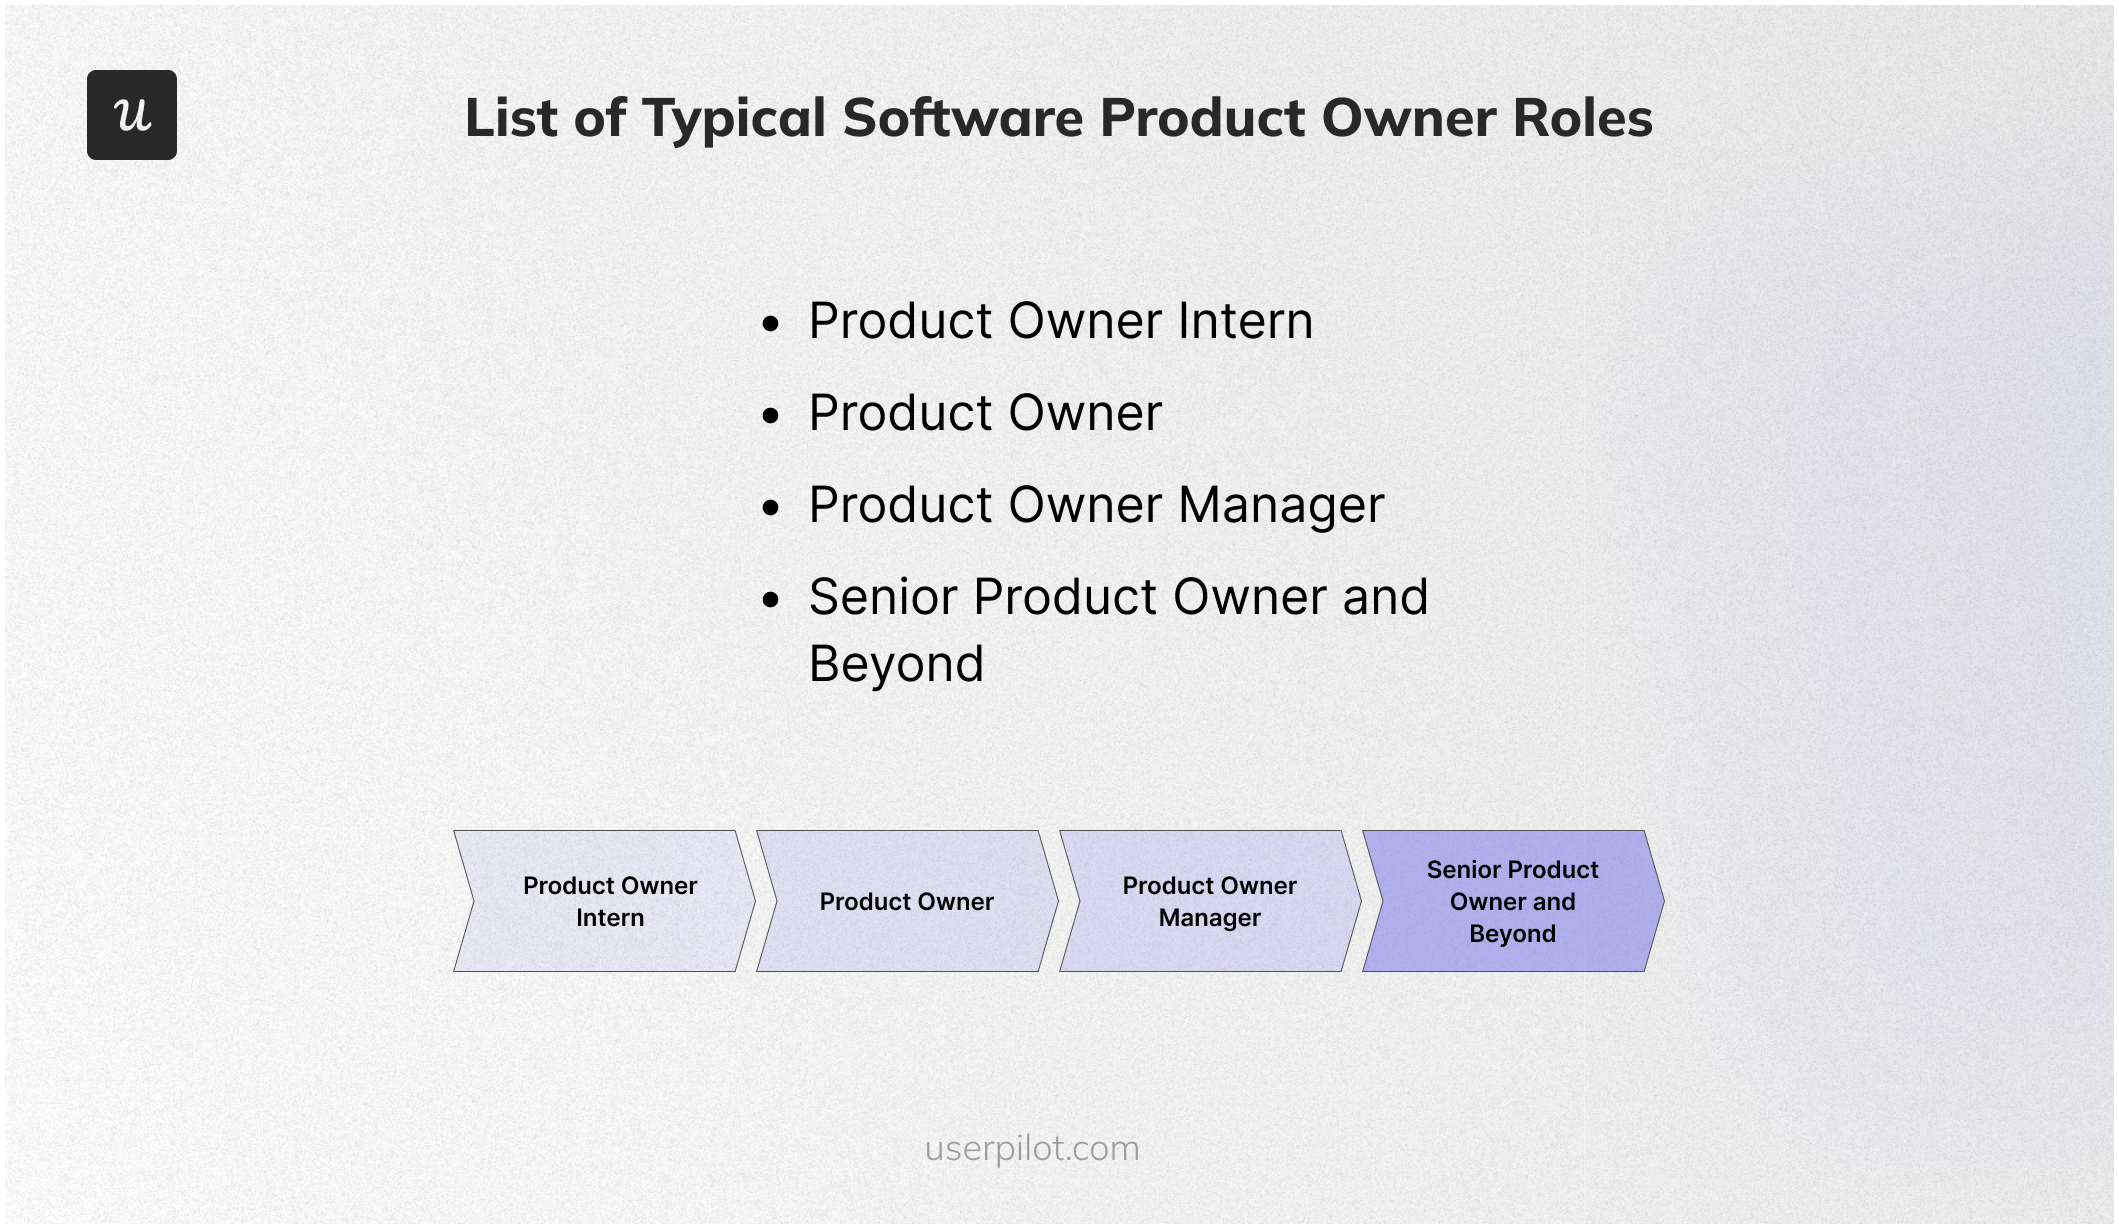 List of Typical Software Product Owner Roles